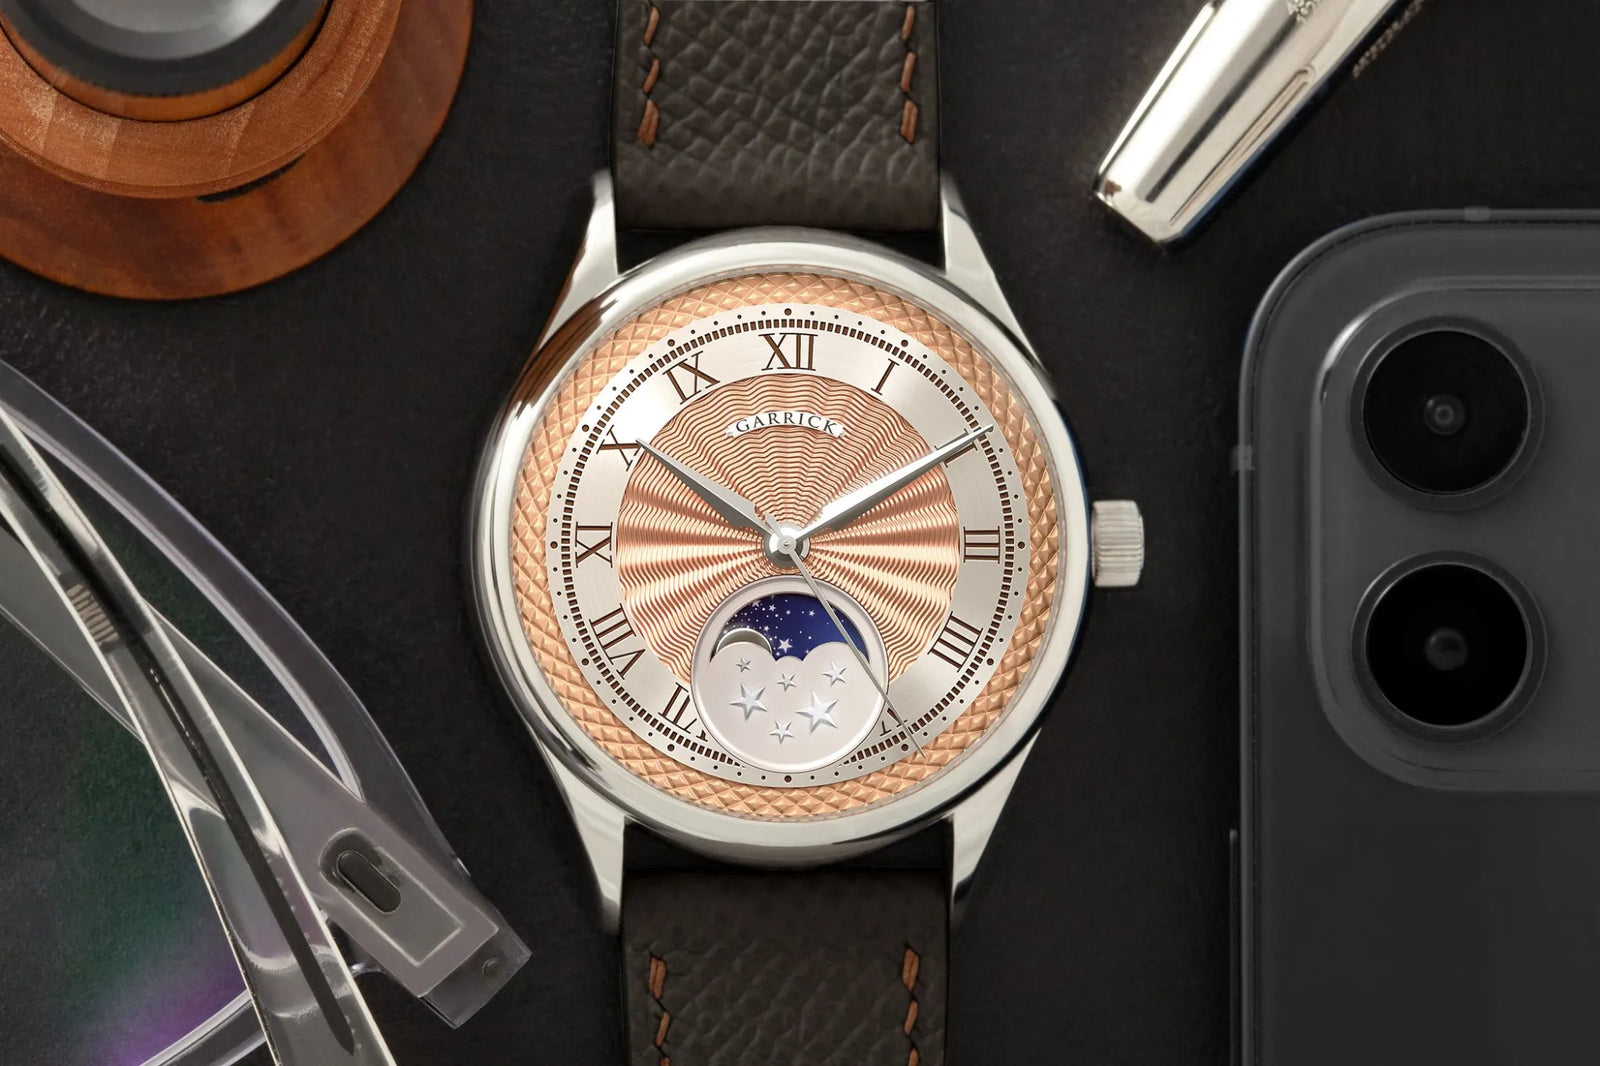 British made S5 watch with moon phase indication and pink gold engine turned dial by Garrick Watchmakers